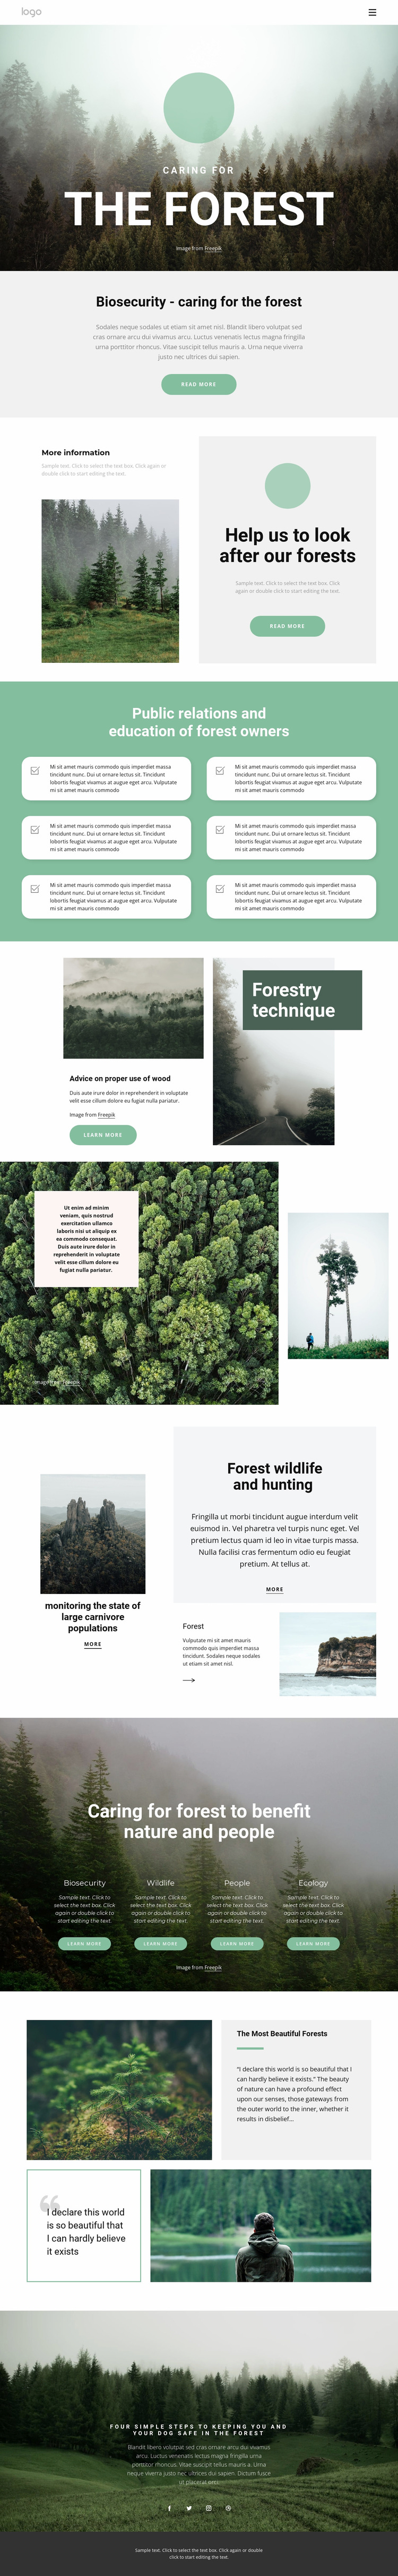 Caring for parks and forests Website Builder Templates